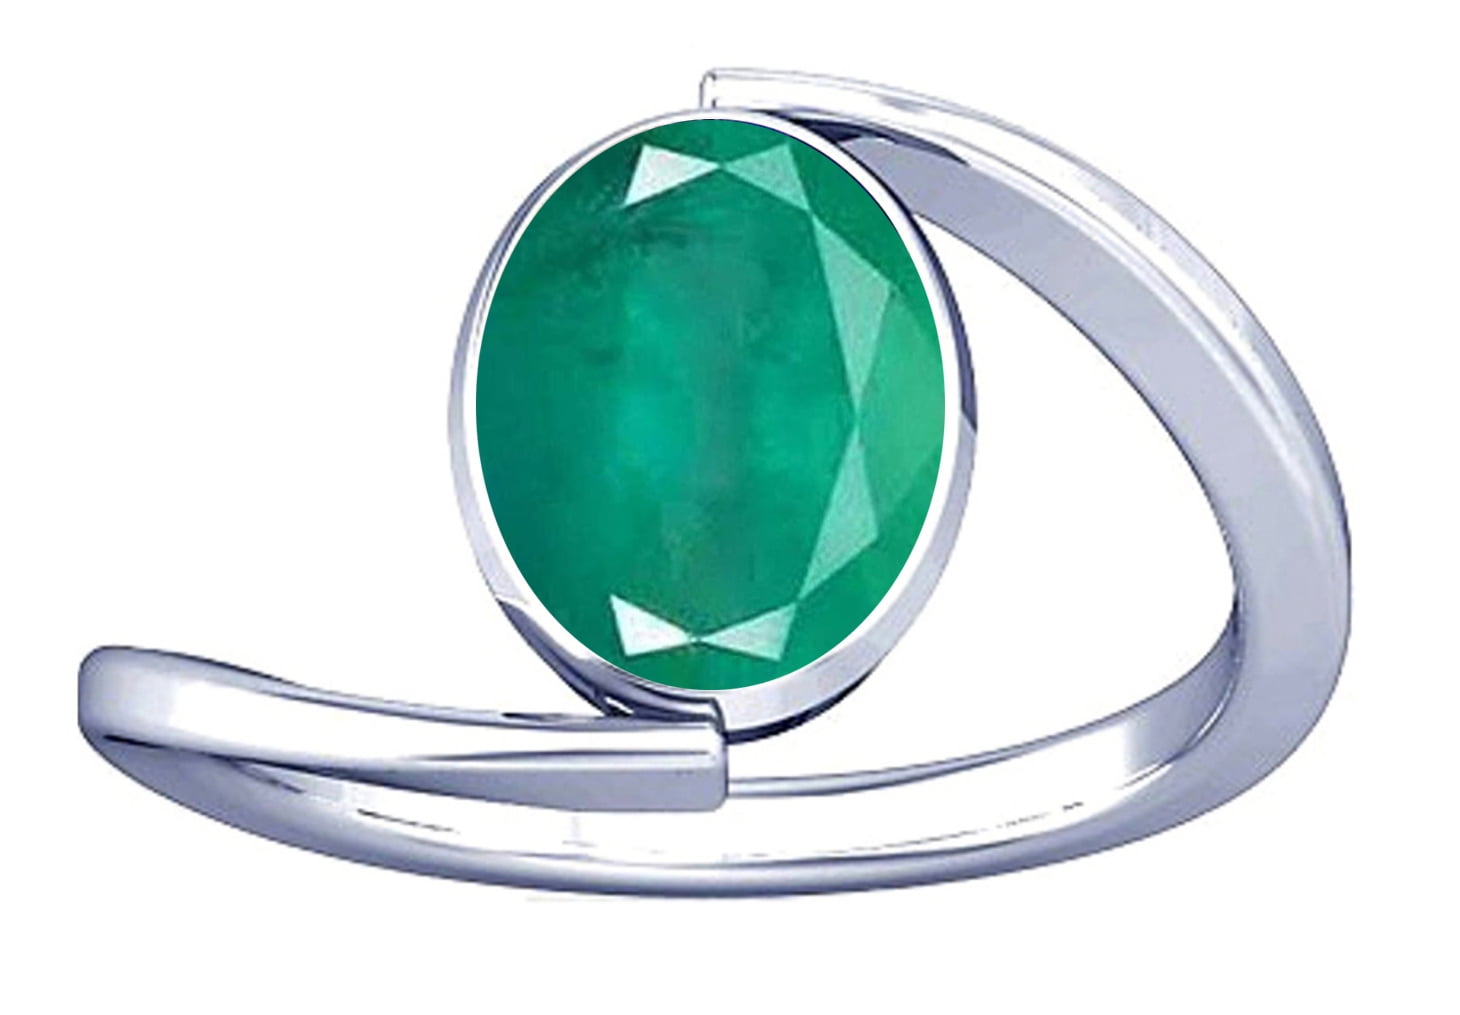 Buy PRANJAL GEMS 10.25 Ratti Panna Stone Original Certified Emerald Gemstone  Adjustable Woman Man Ring With Lab Certificate(NP) Silver at Amazon.in